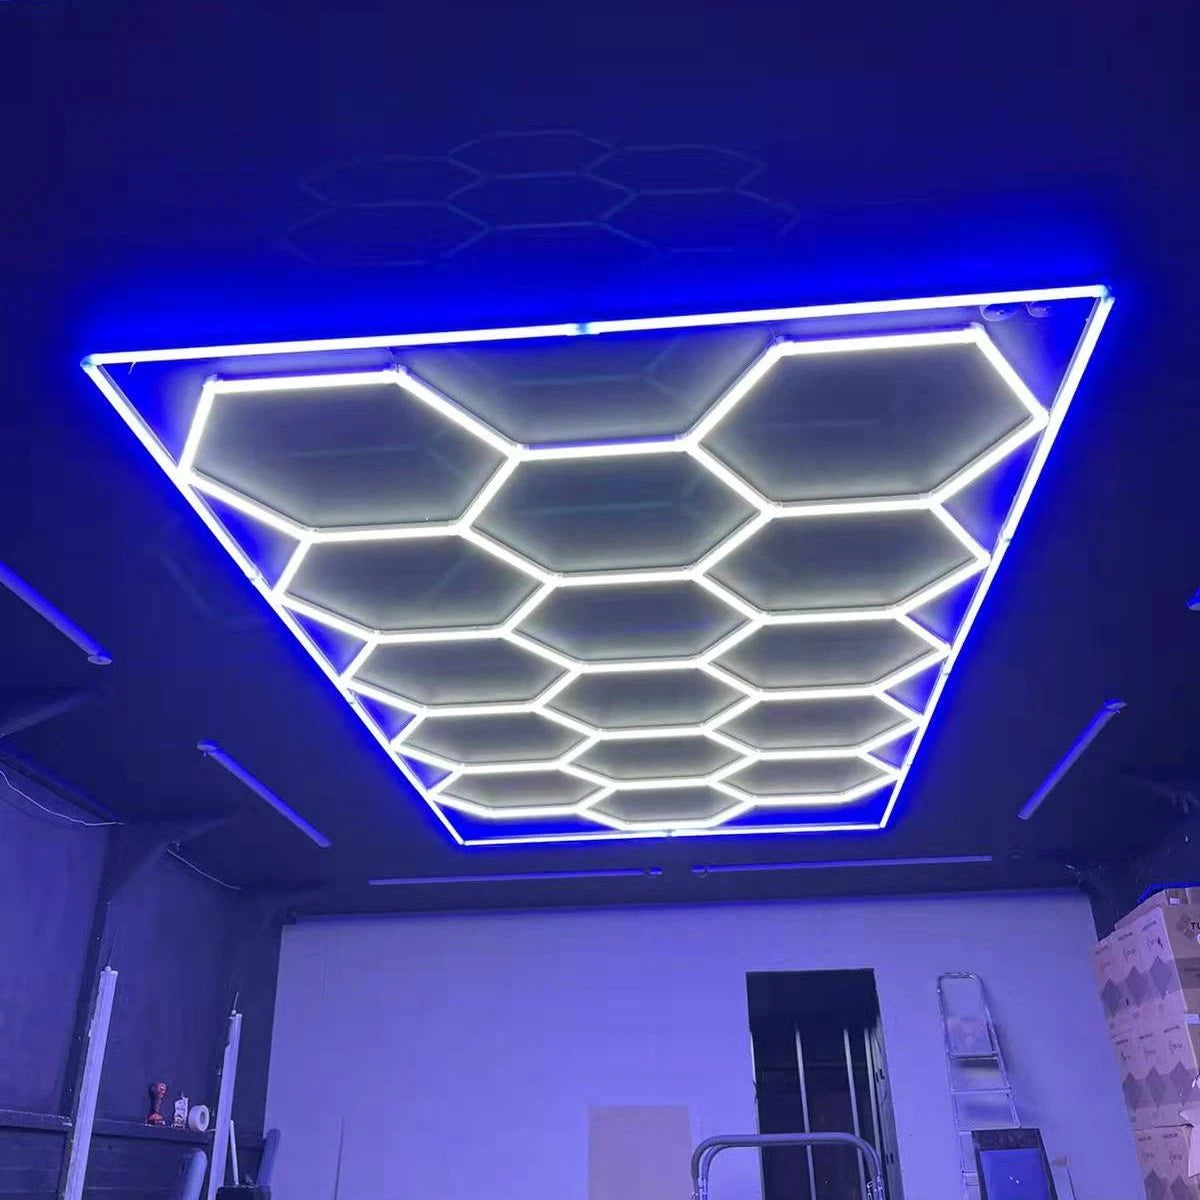 15 Hex Kit With Blue Border (16’ x 8’)